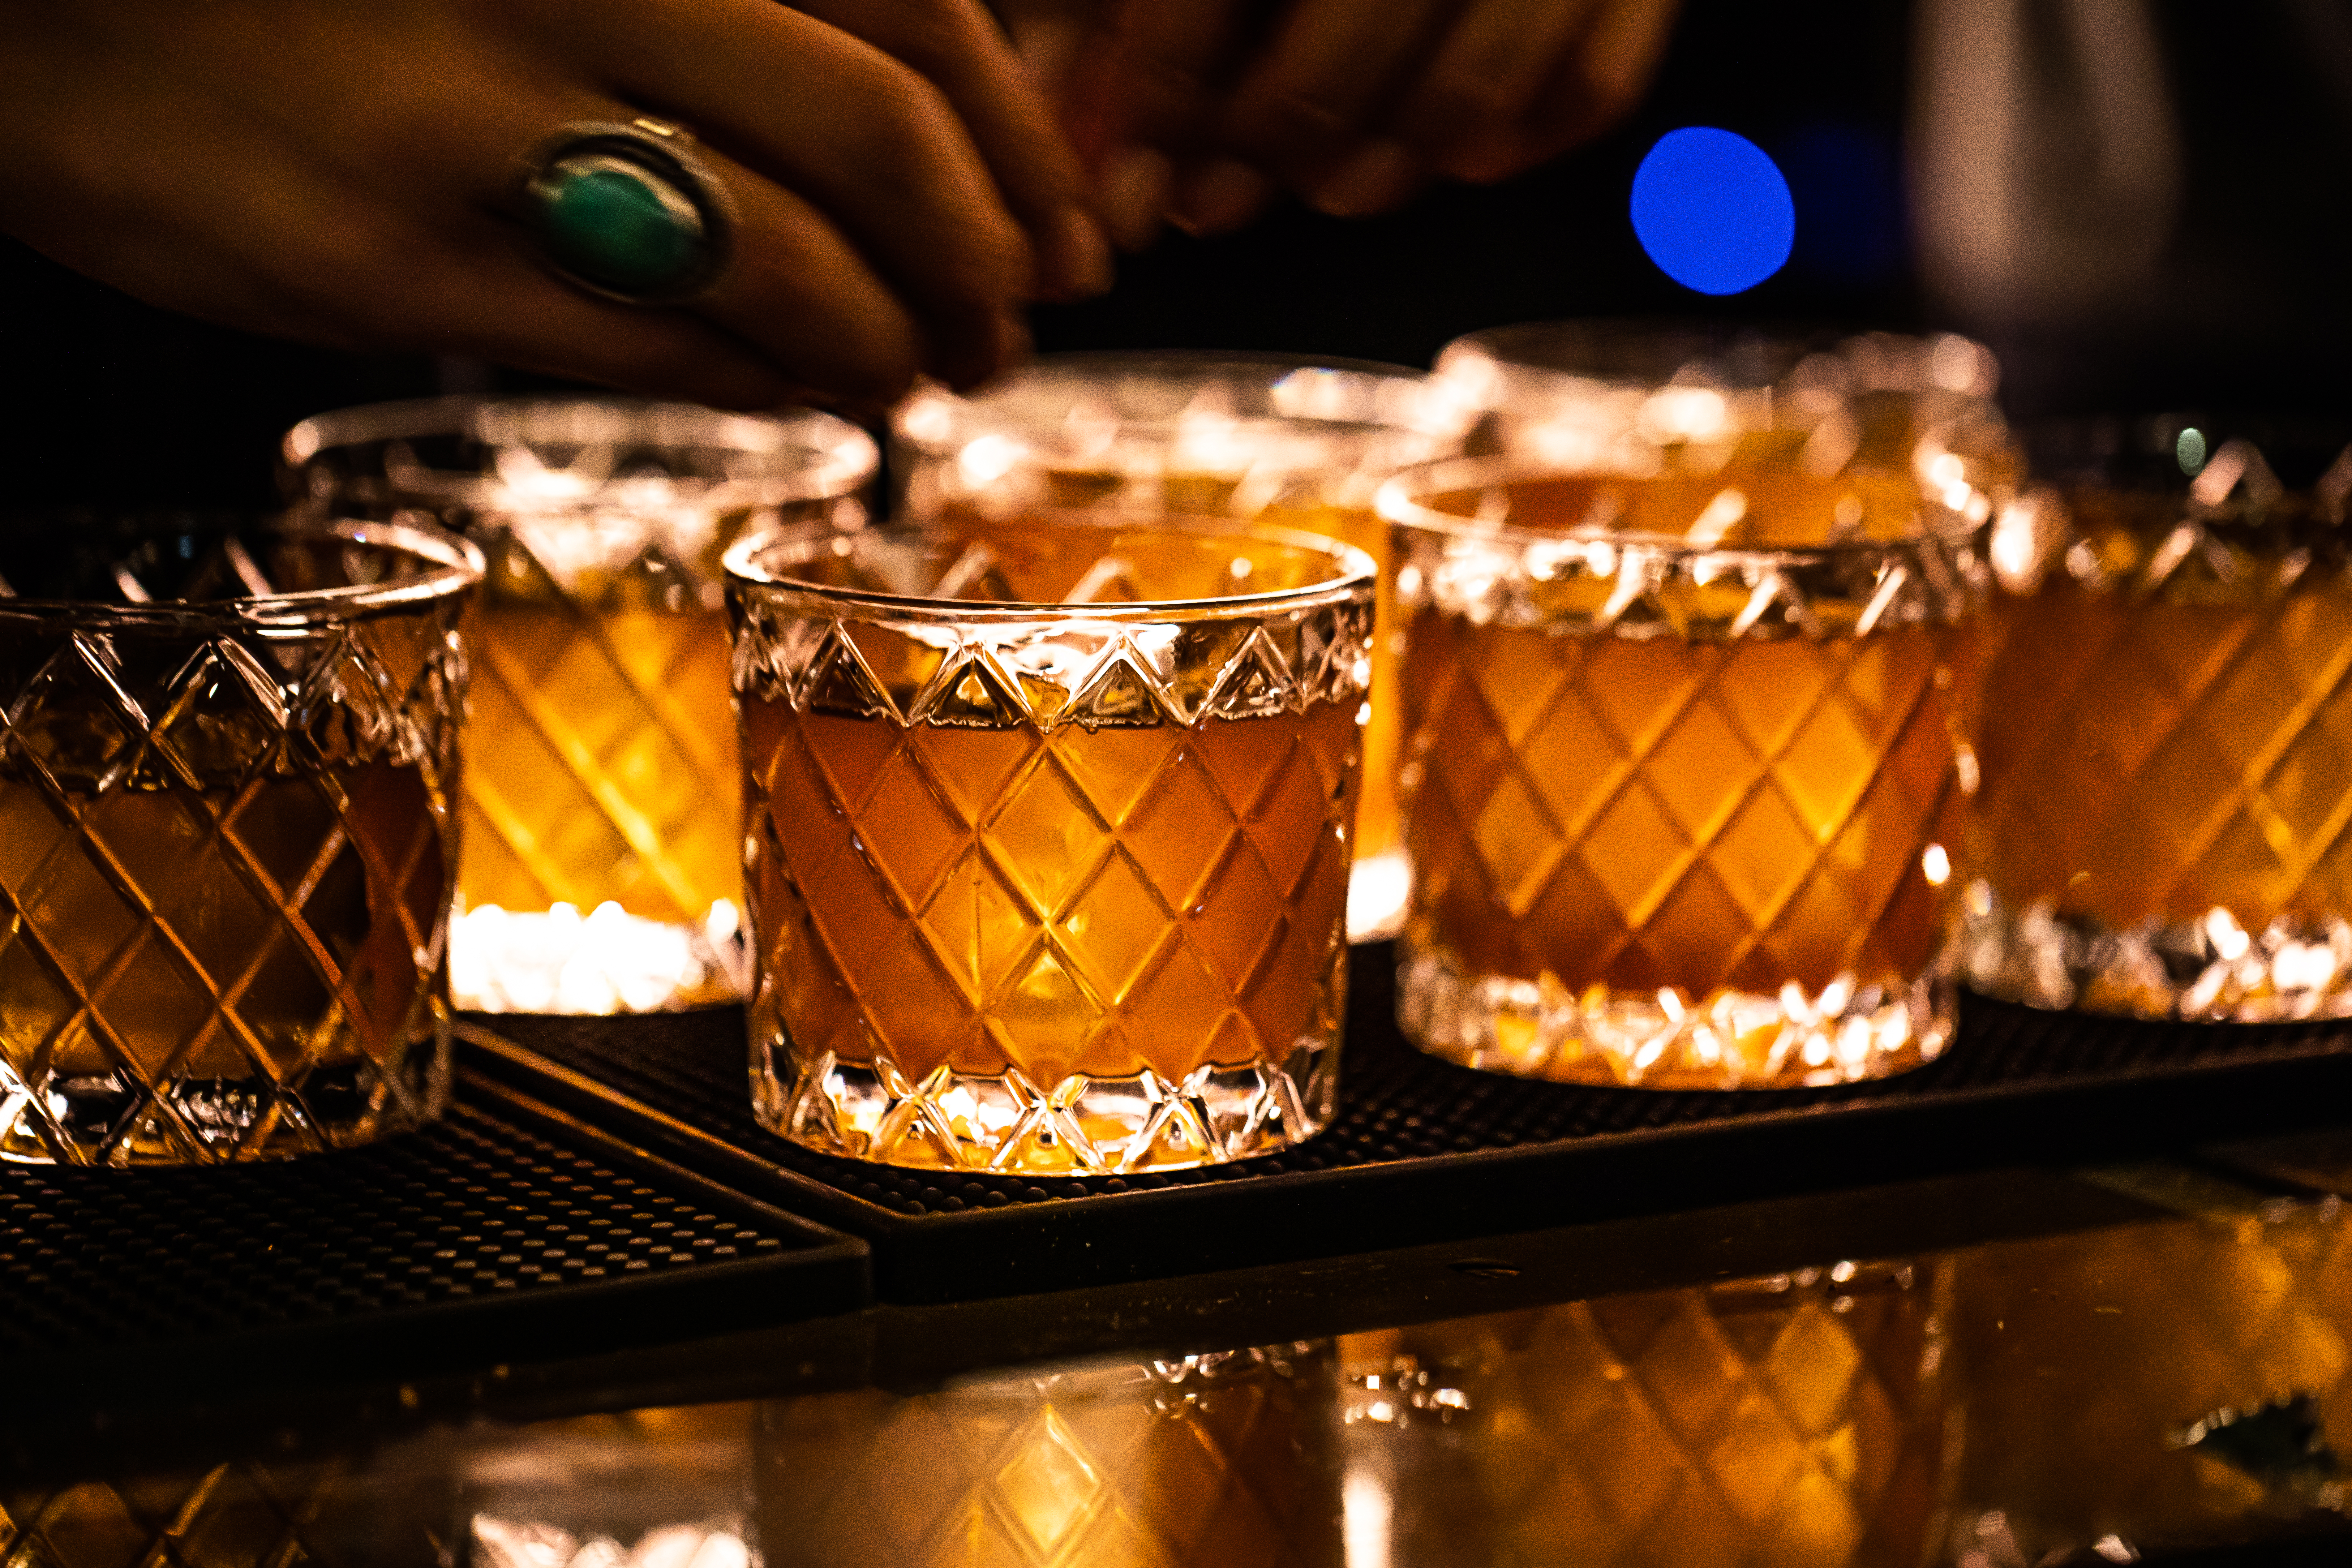 A bar top holds seven rocks glasses with diamond patterns. The drinks within are golden brown with a large ice cube.